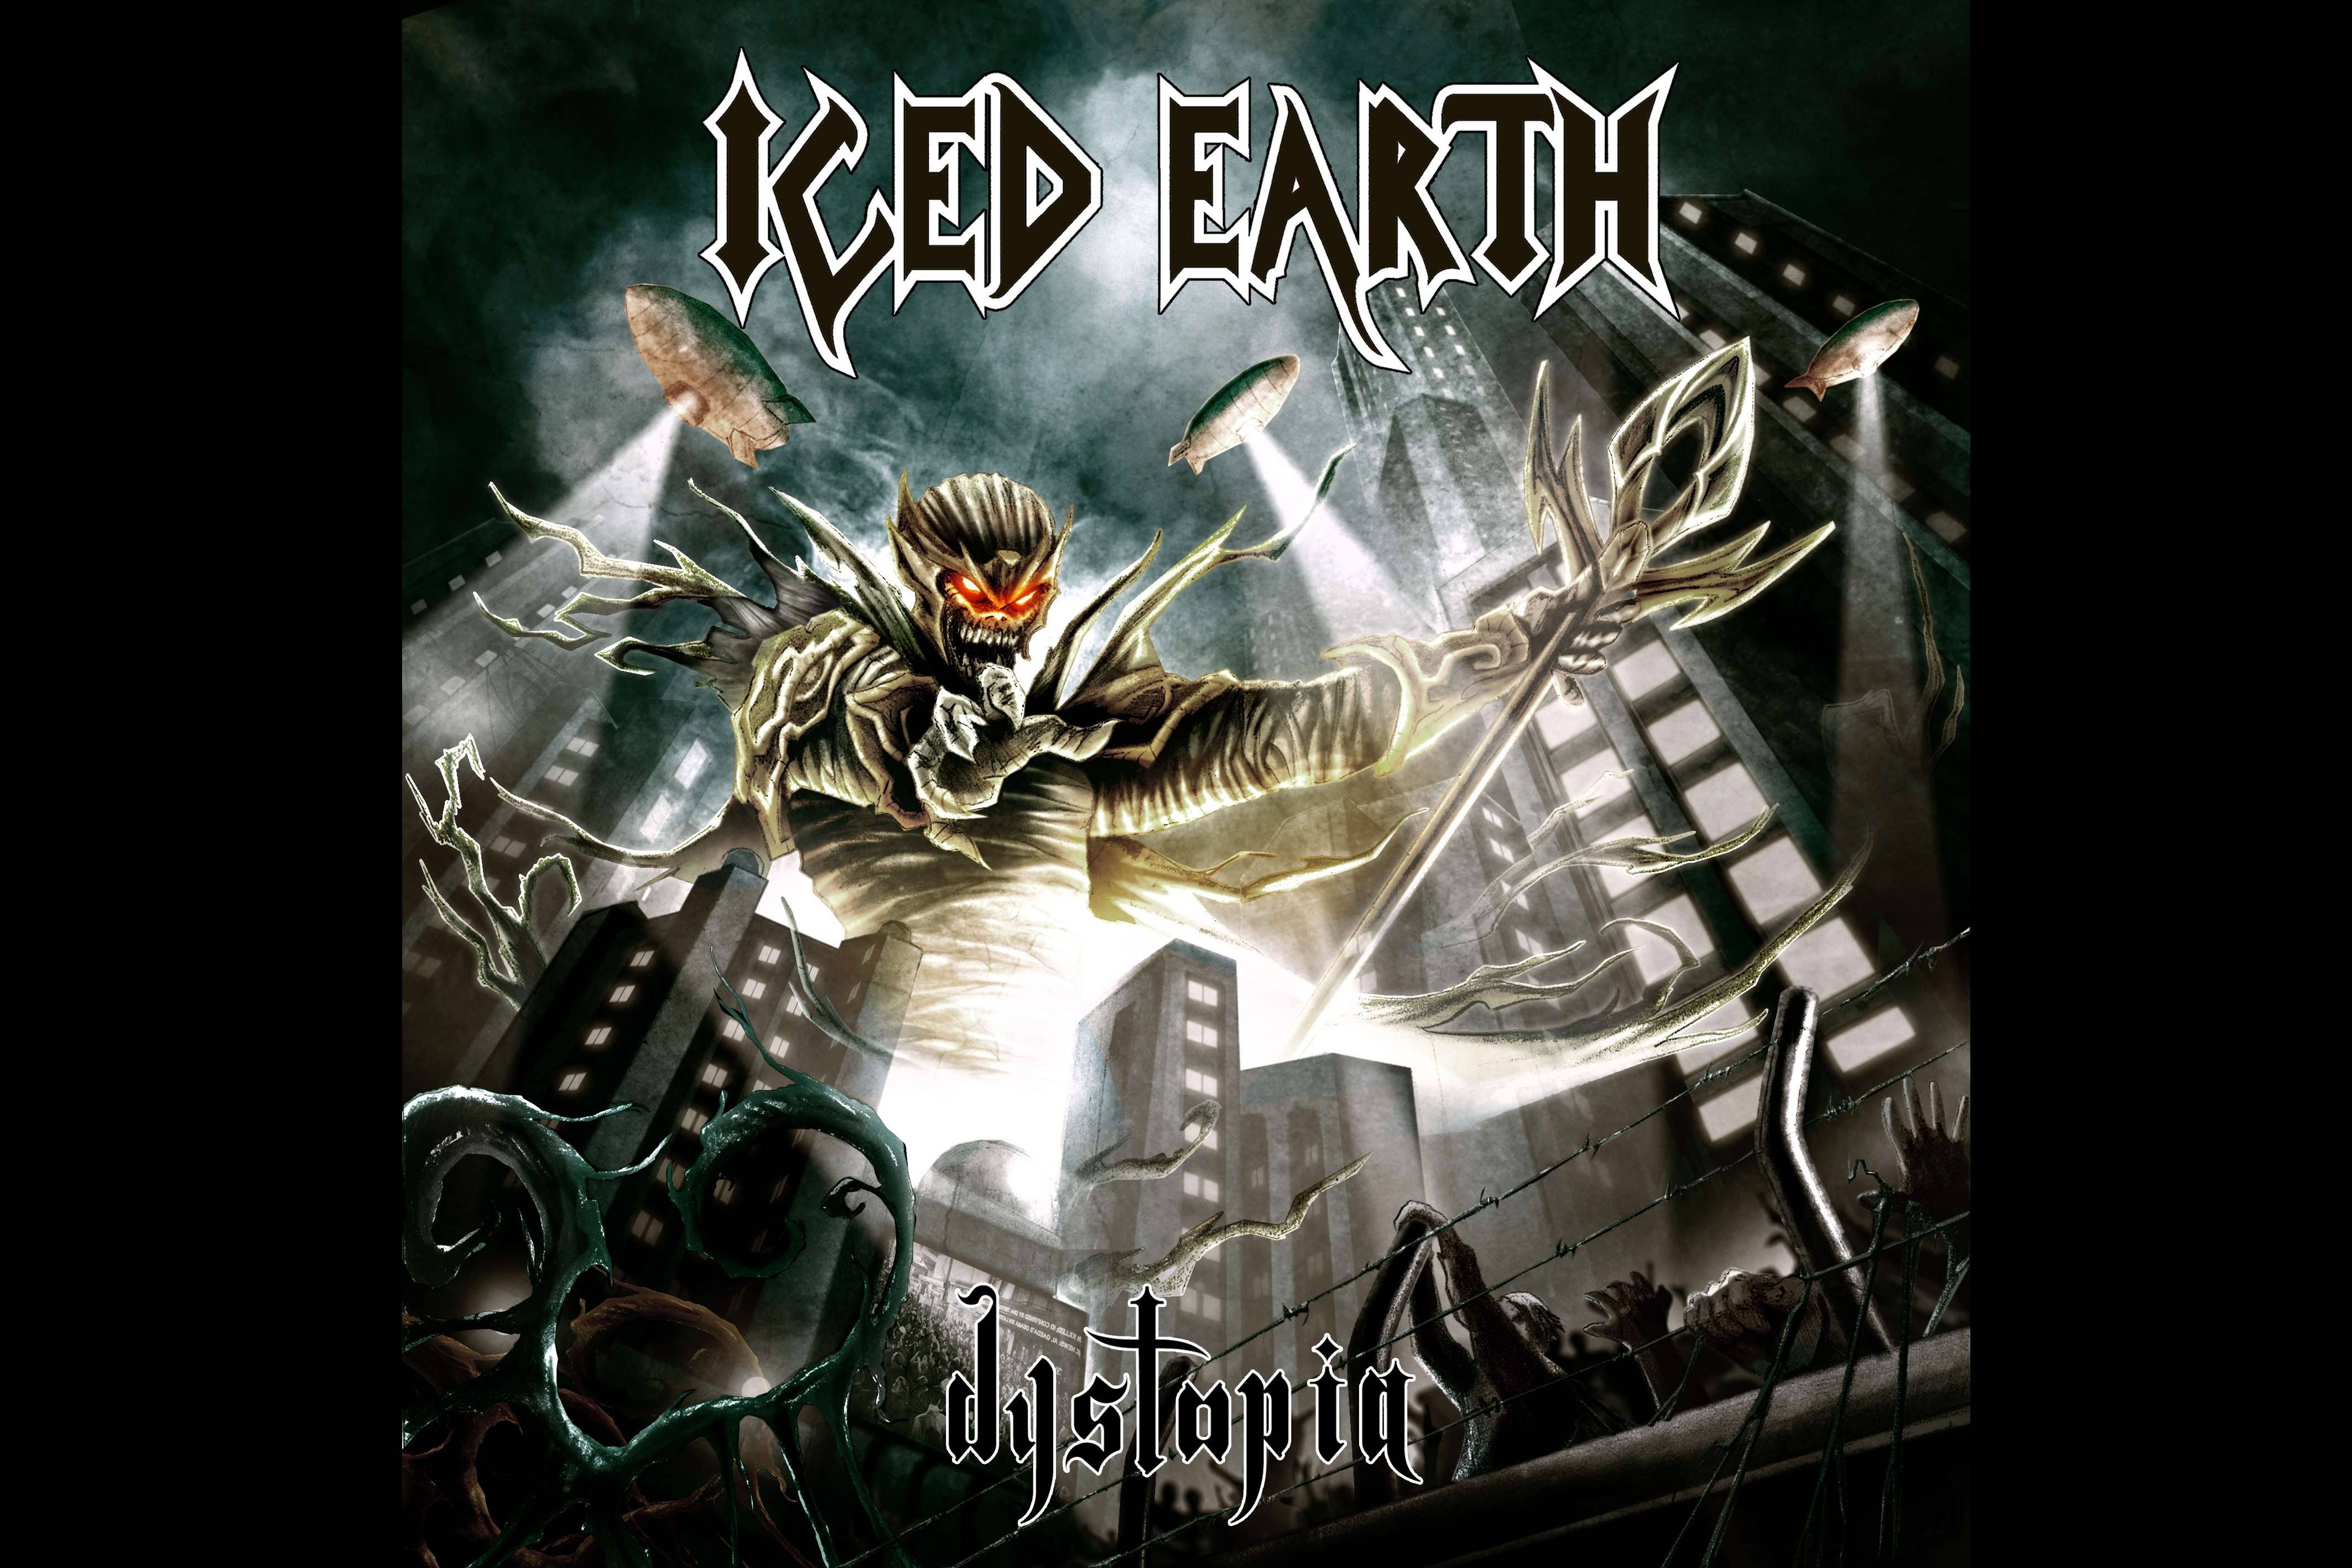 Iced Earth Computer Wallpapers, Desktop Backgrounds 4252x2835 Id